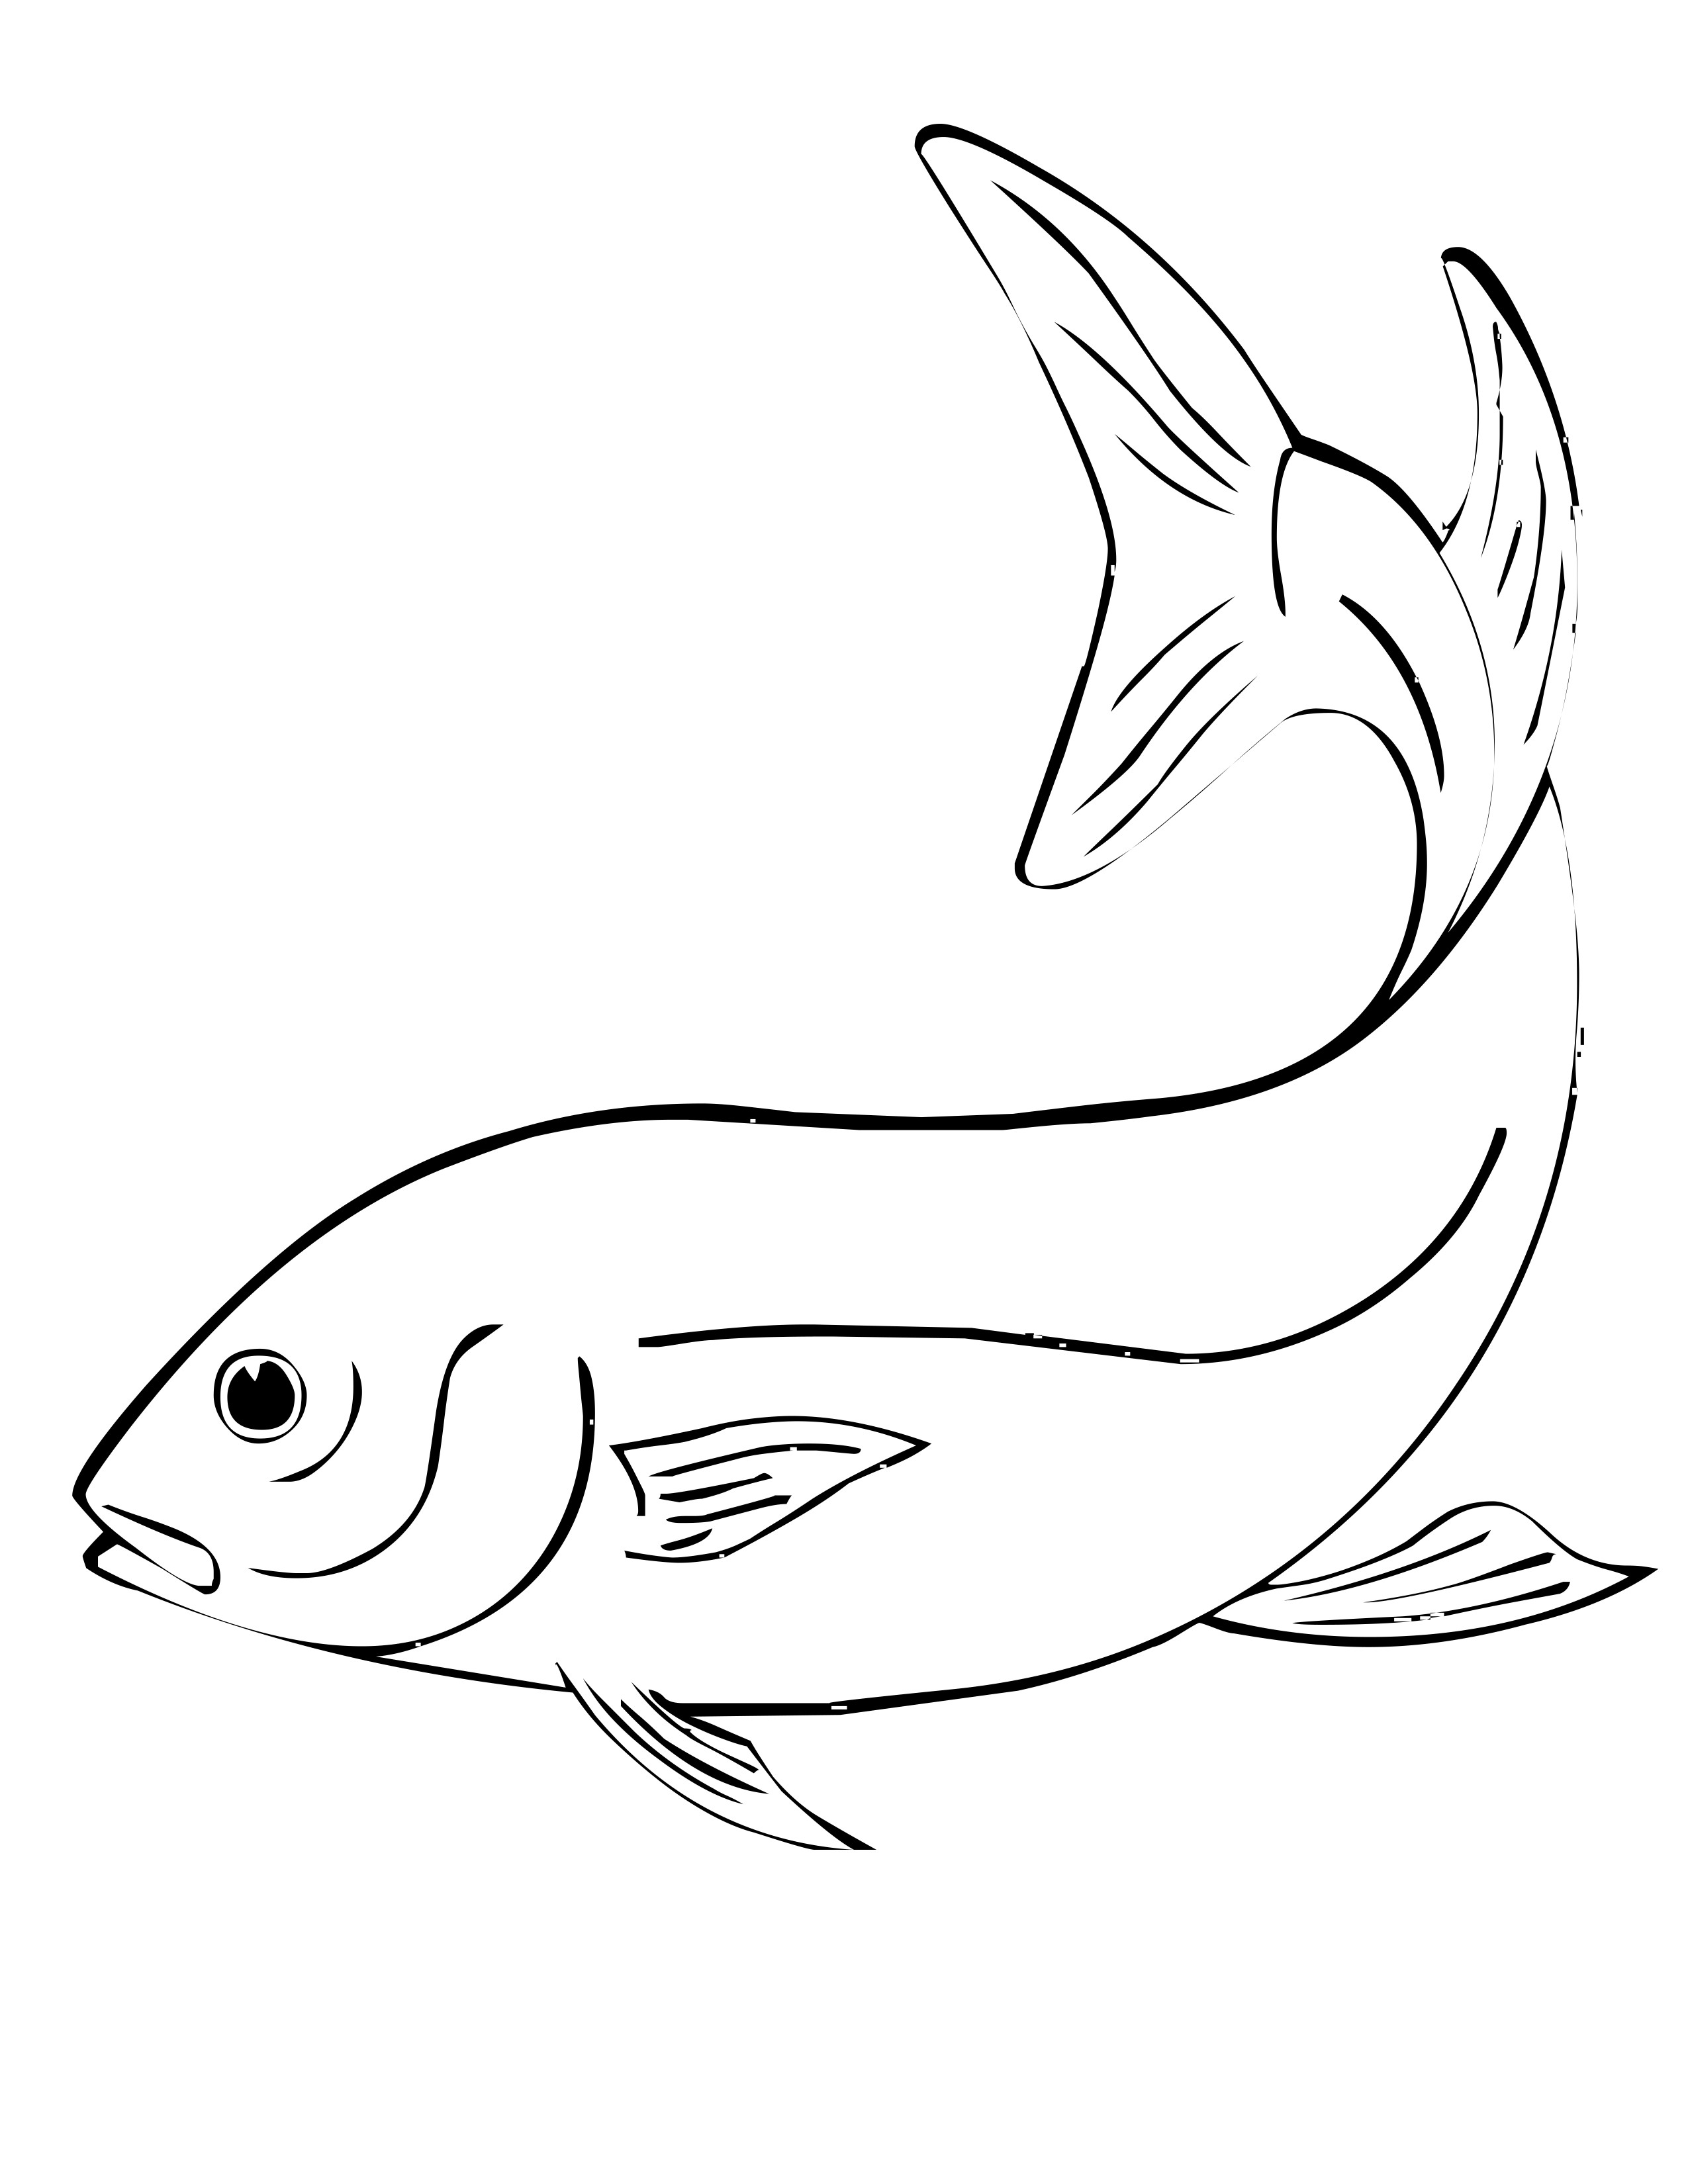 Free Printable Fish Coloring Pages For Kids Coloring Wallpapers Download Free Images Wallpaper [coloring436.blogspot.com]